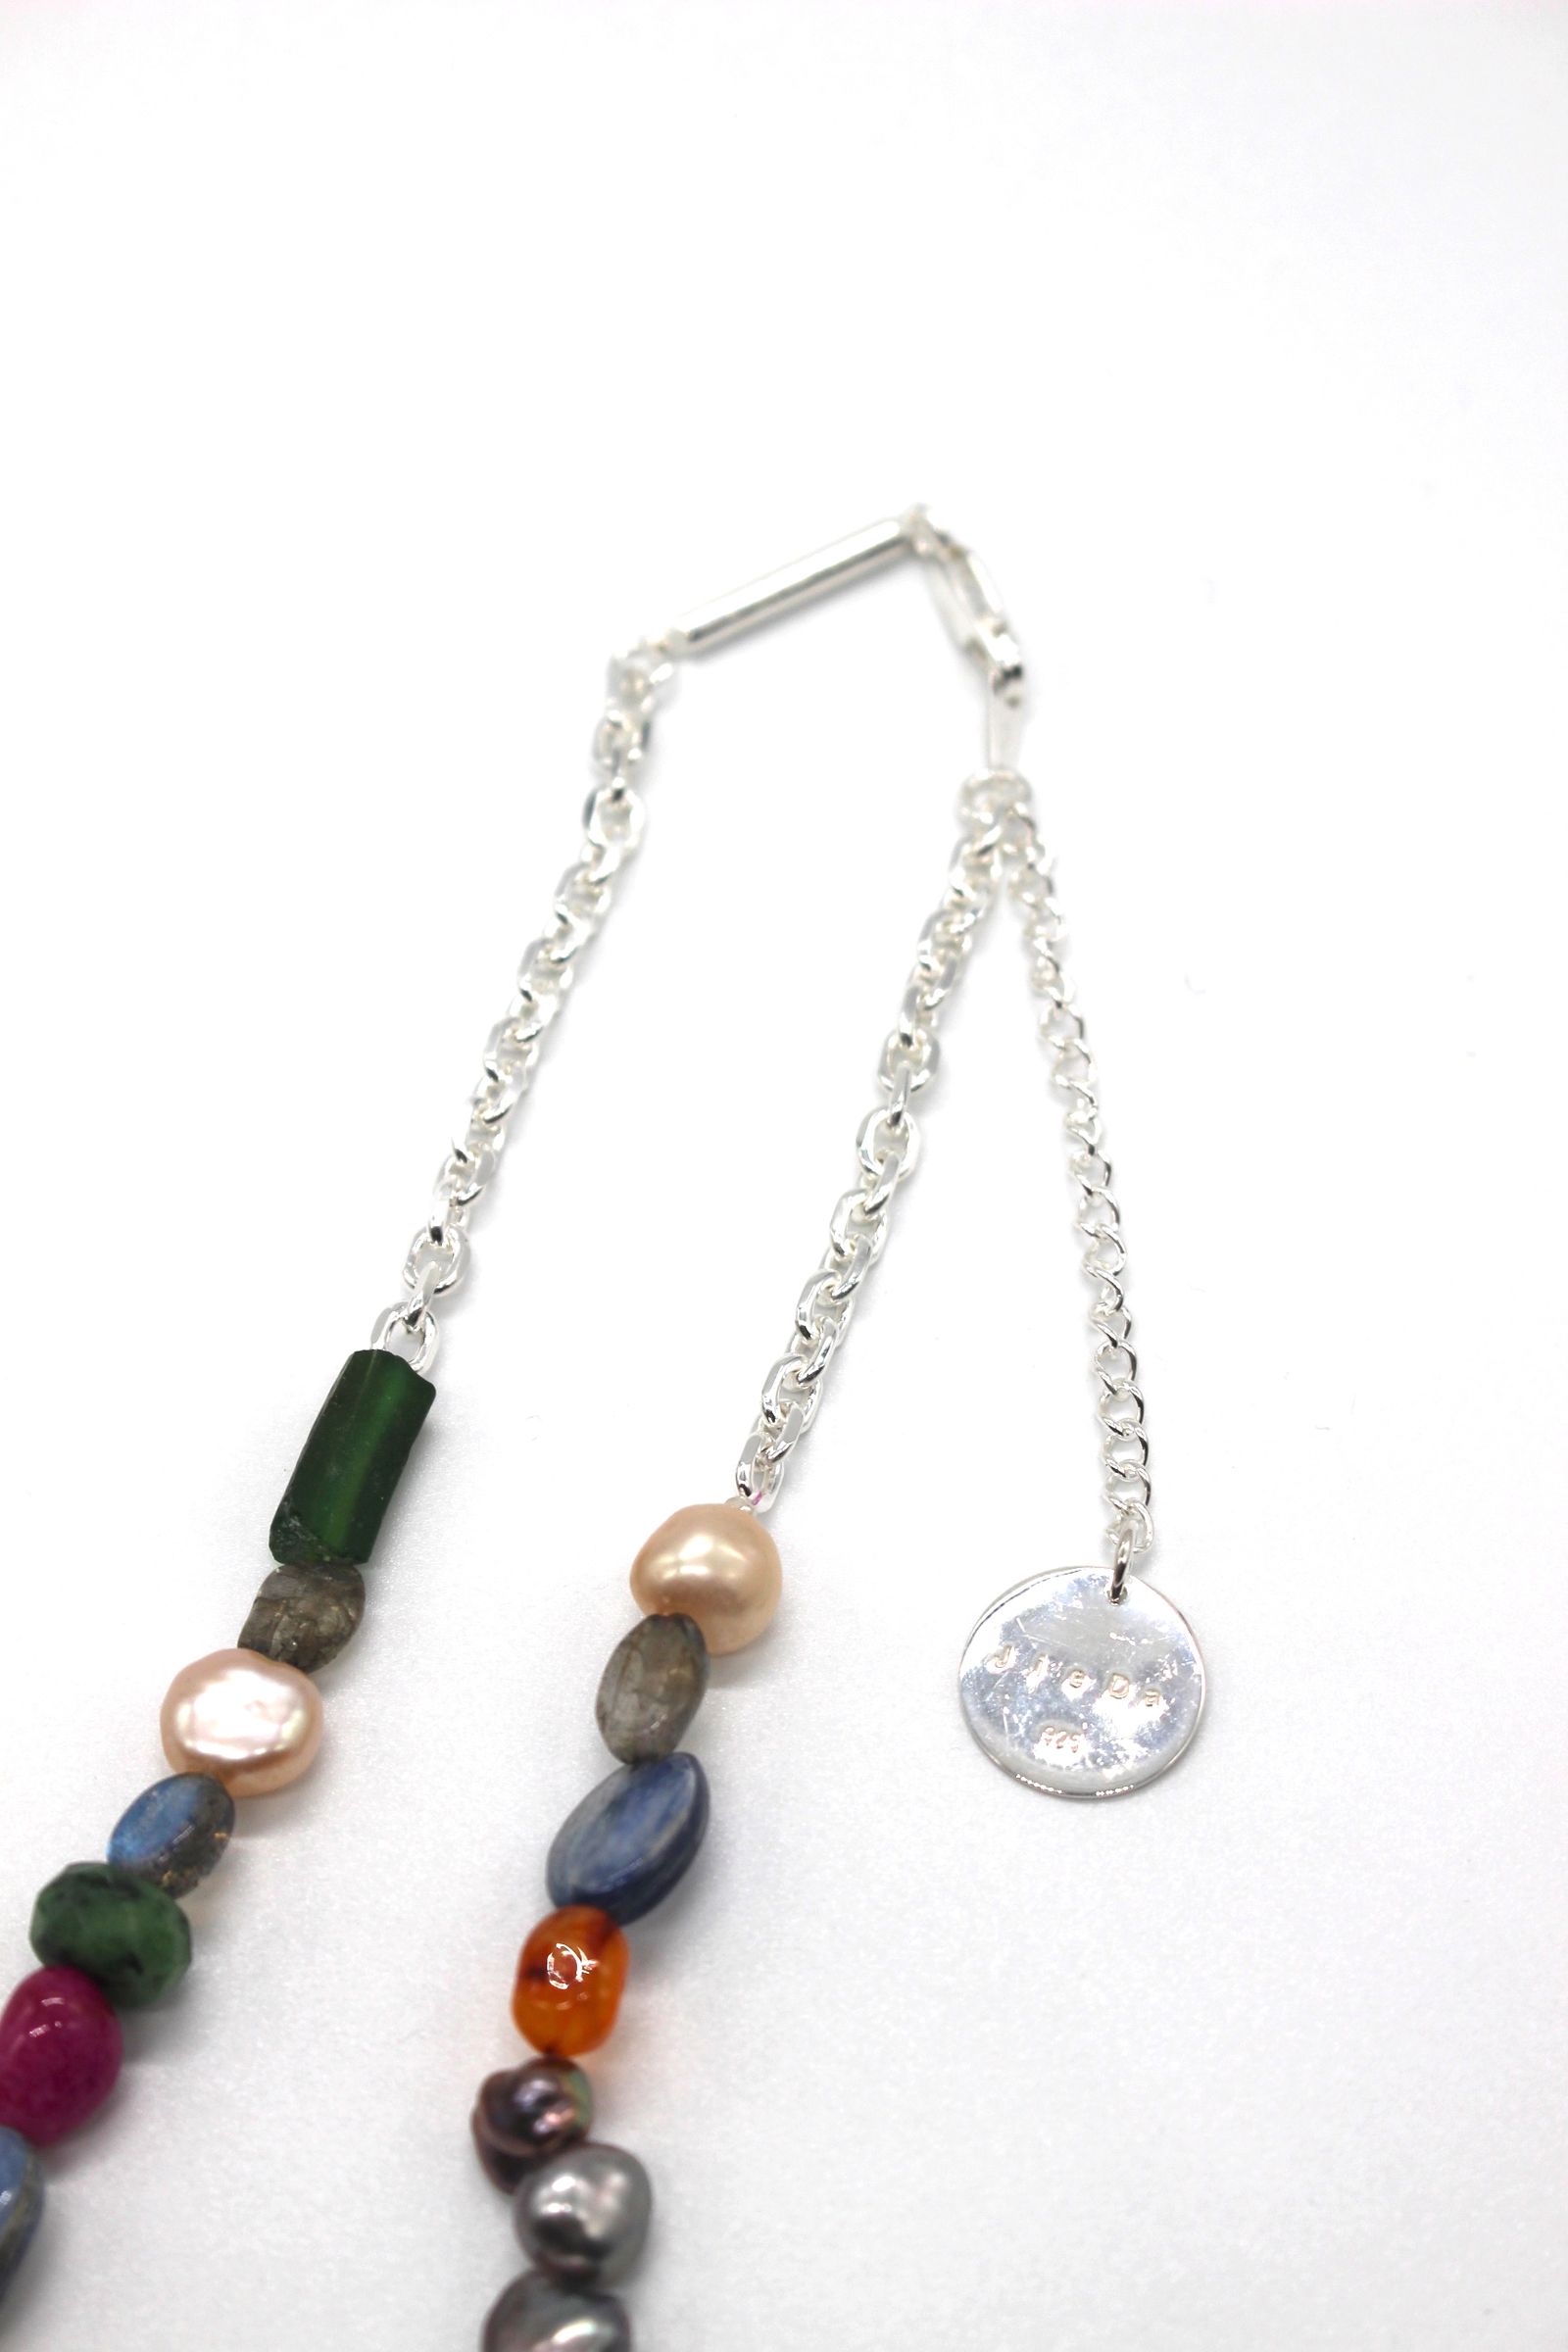 MIX STONE NECKLACE/ネックレス - FREE